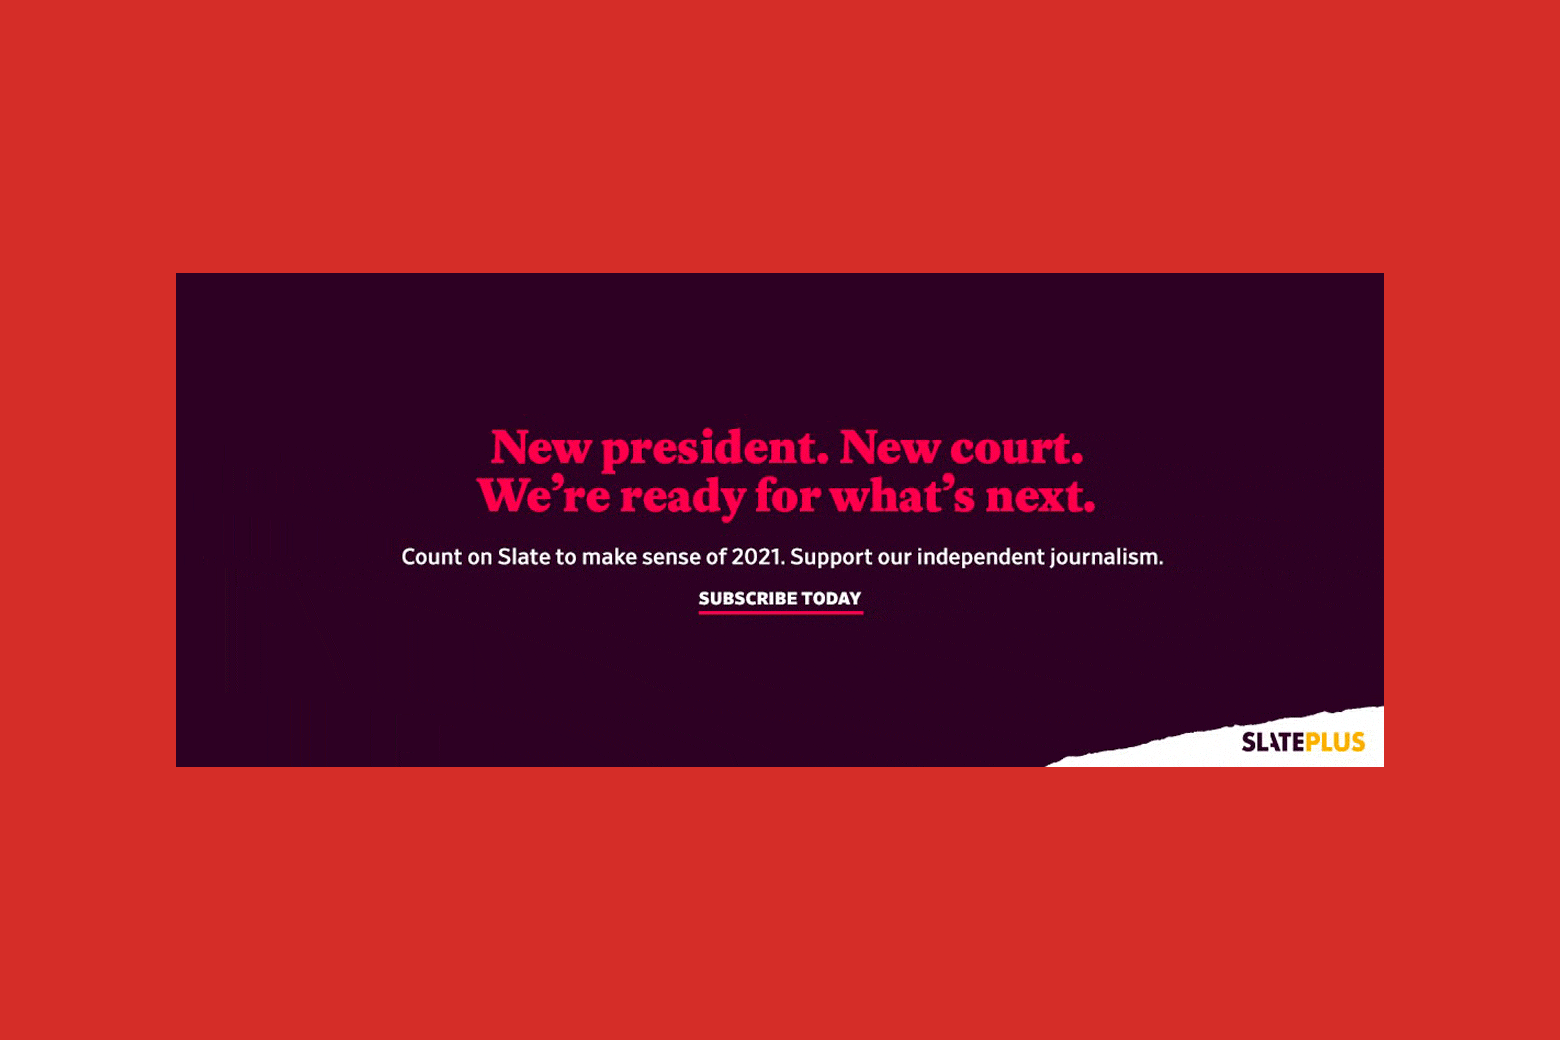 A Slate Plus ad that says, "New president. New court. We're ready for what's next."